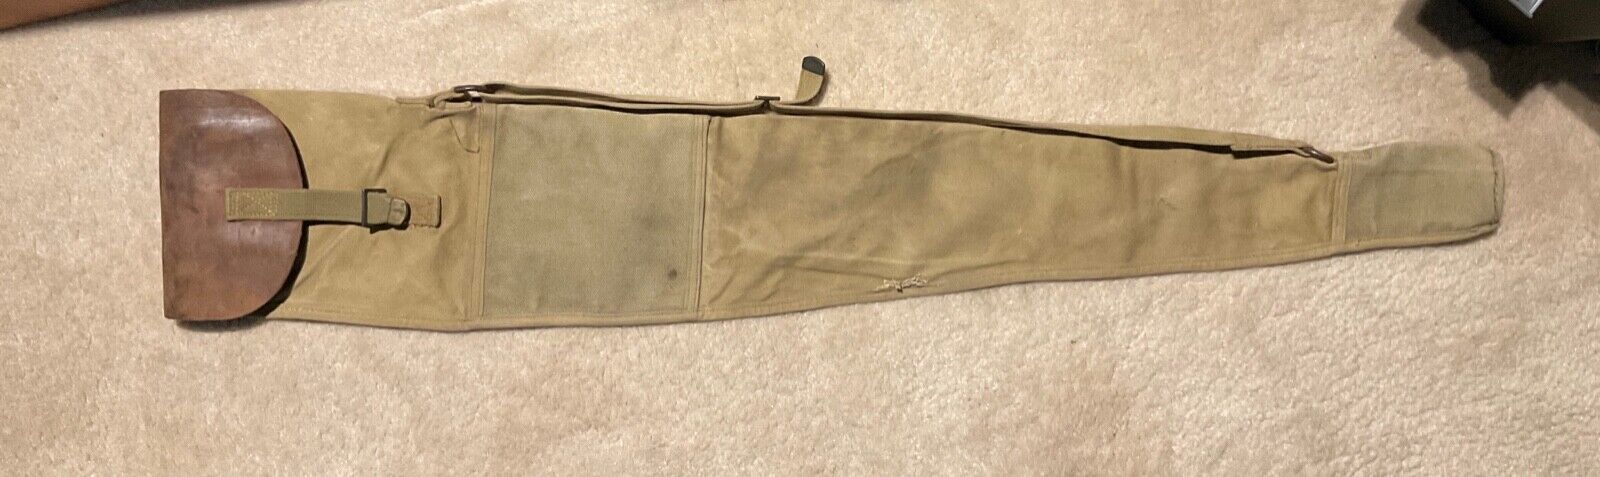 US  WW1 M1903 Springfield Canvas and Leather Carrying Case